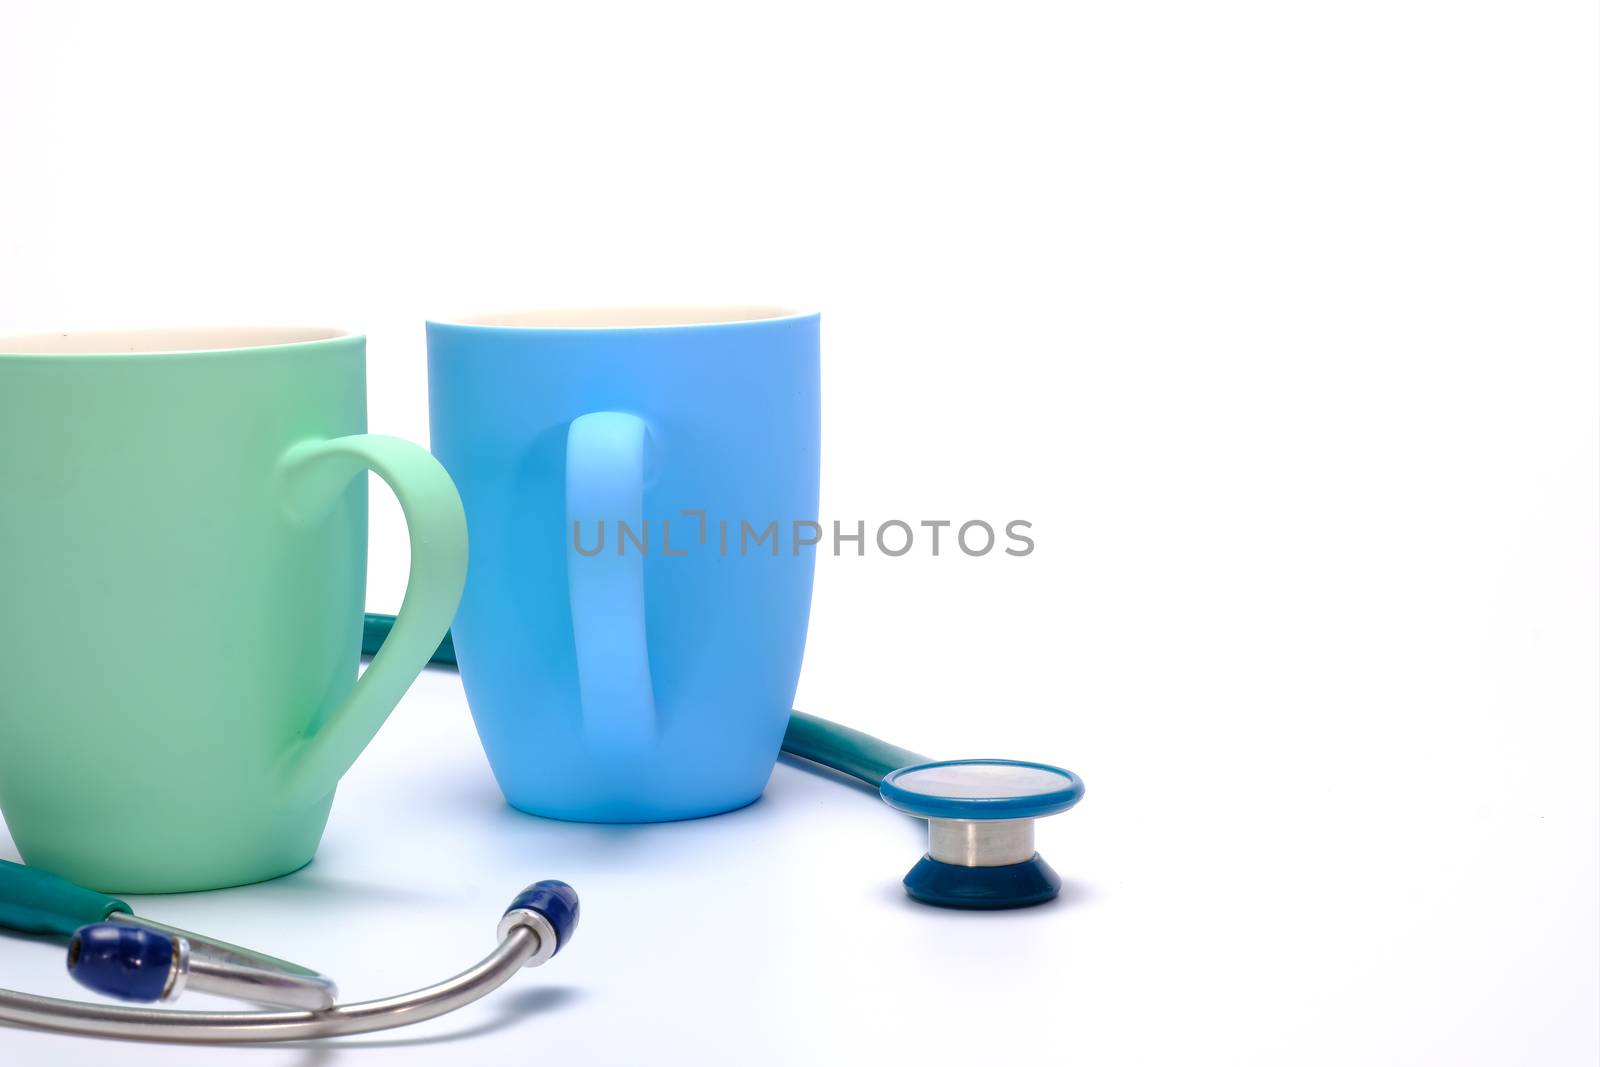 a green stethoscope and two colorful coffee mugs on white background